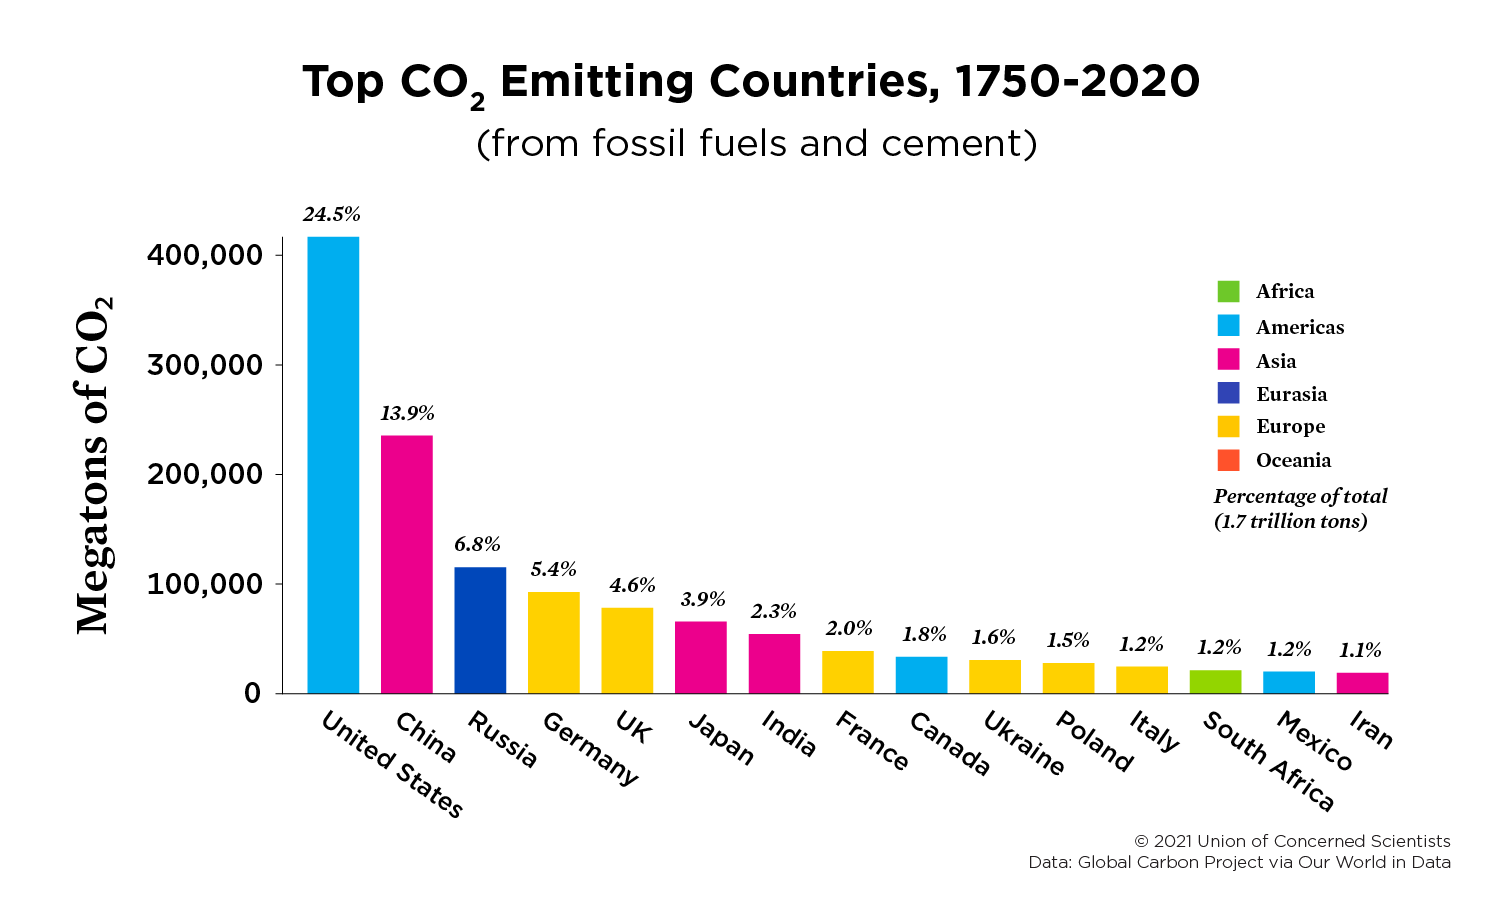 Statistics for CO2 emitting countries